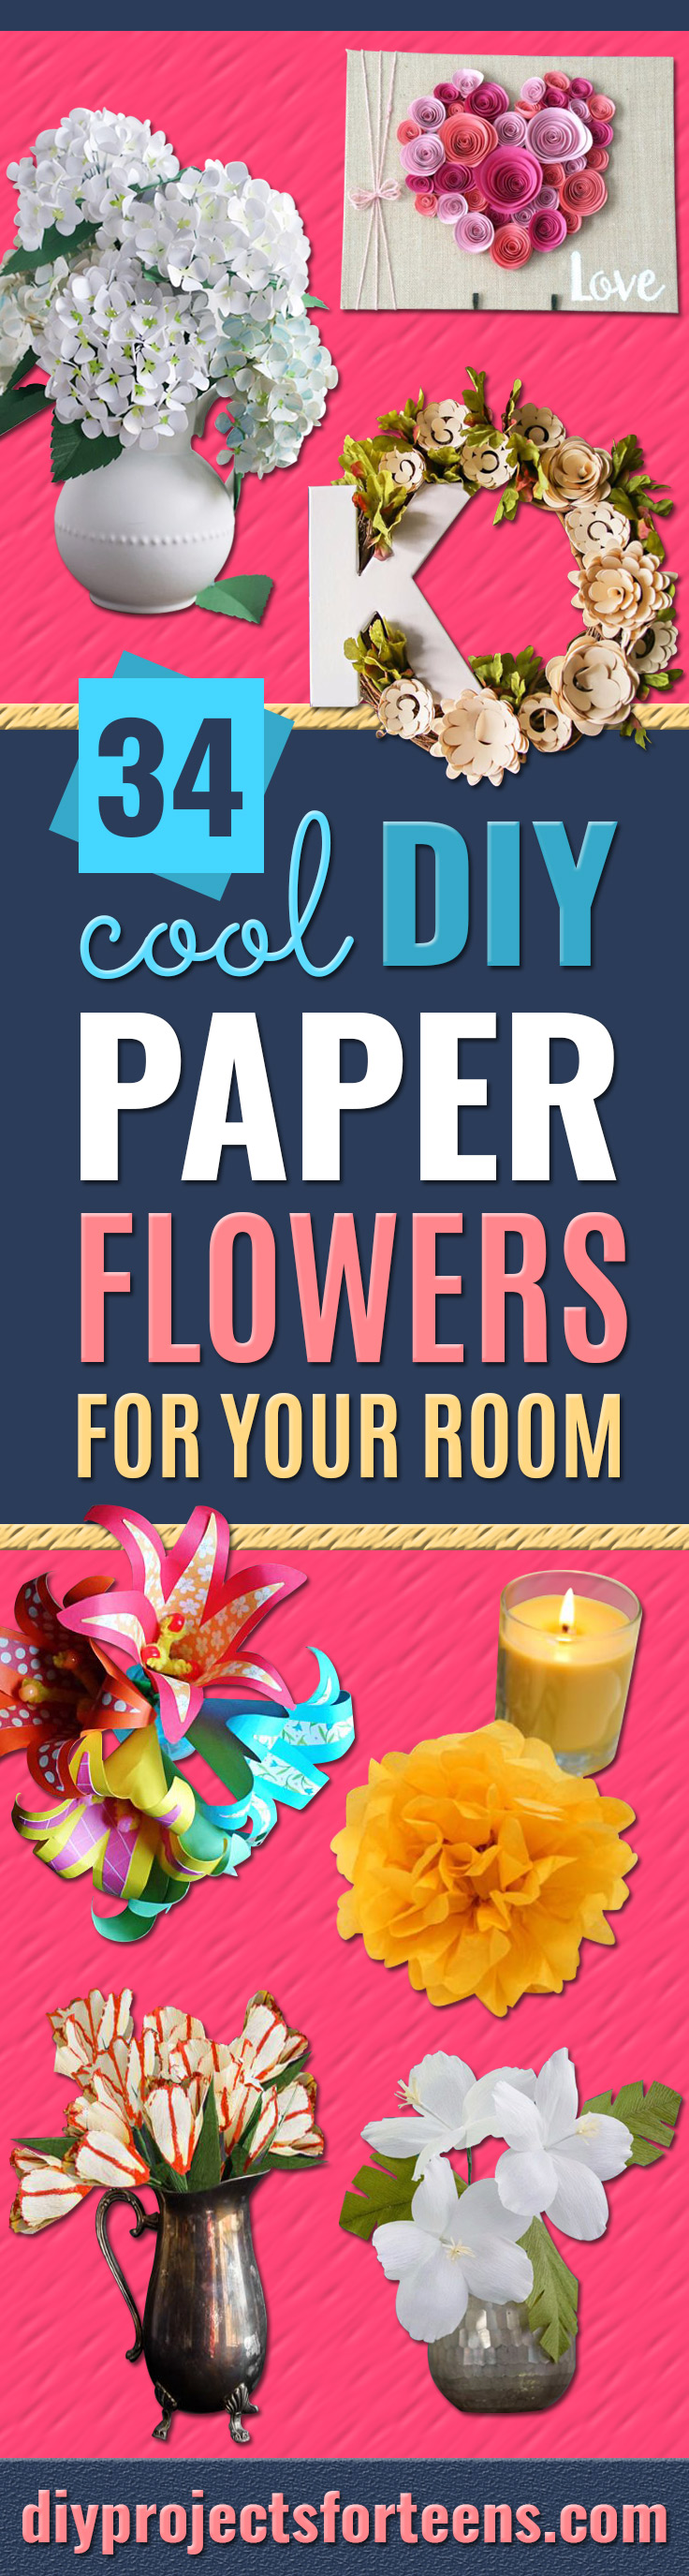 DIY Paper Flowers For Your Room - How To Make A Paper Flower - Large Wedding Backdrop for Wall Decor - Easy Tissue Paper Flower Tutorial for Kids - Giant Projects for Photo Backdrops - Daisy, Roses, Bouquets, Centerpieces - Cricut Template and Step by Step Tutorial #papercrafts #paperflowers #teencrafts